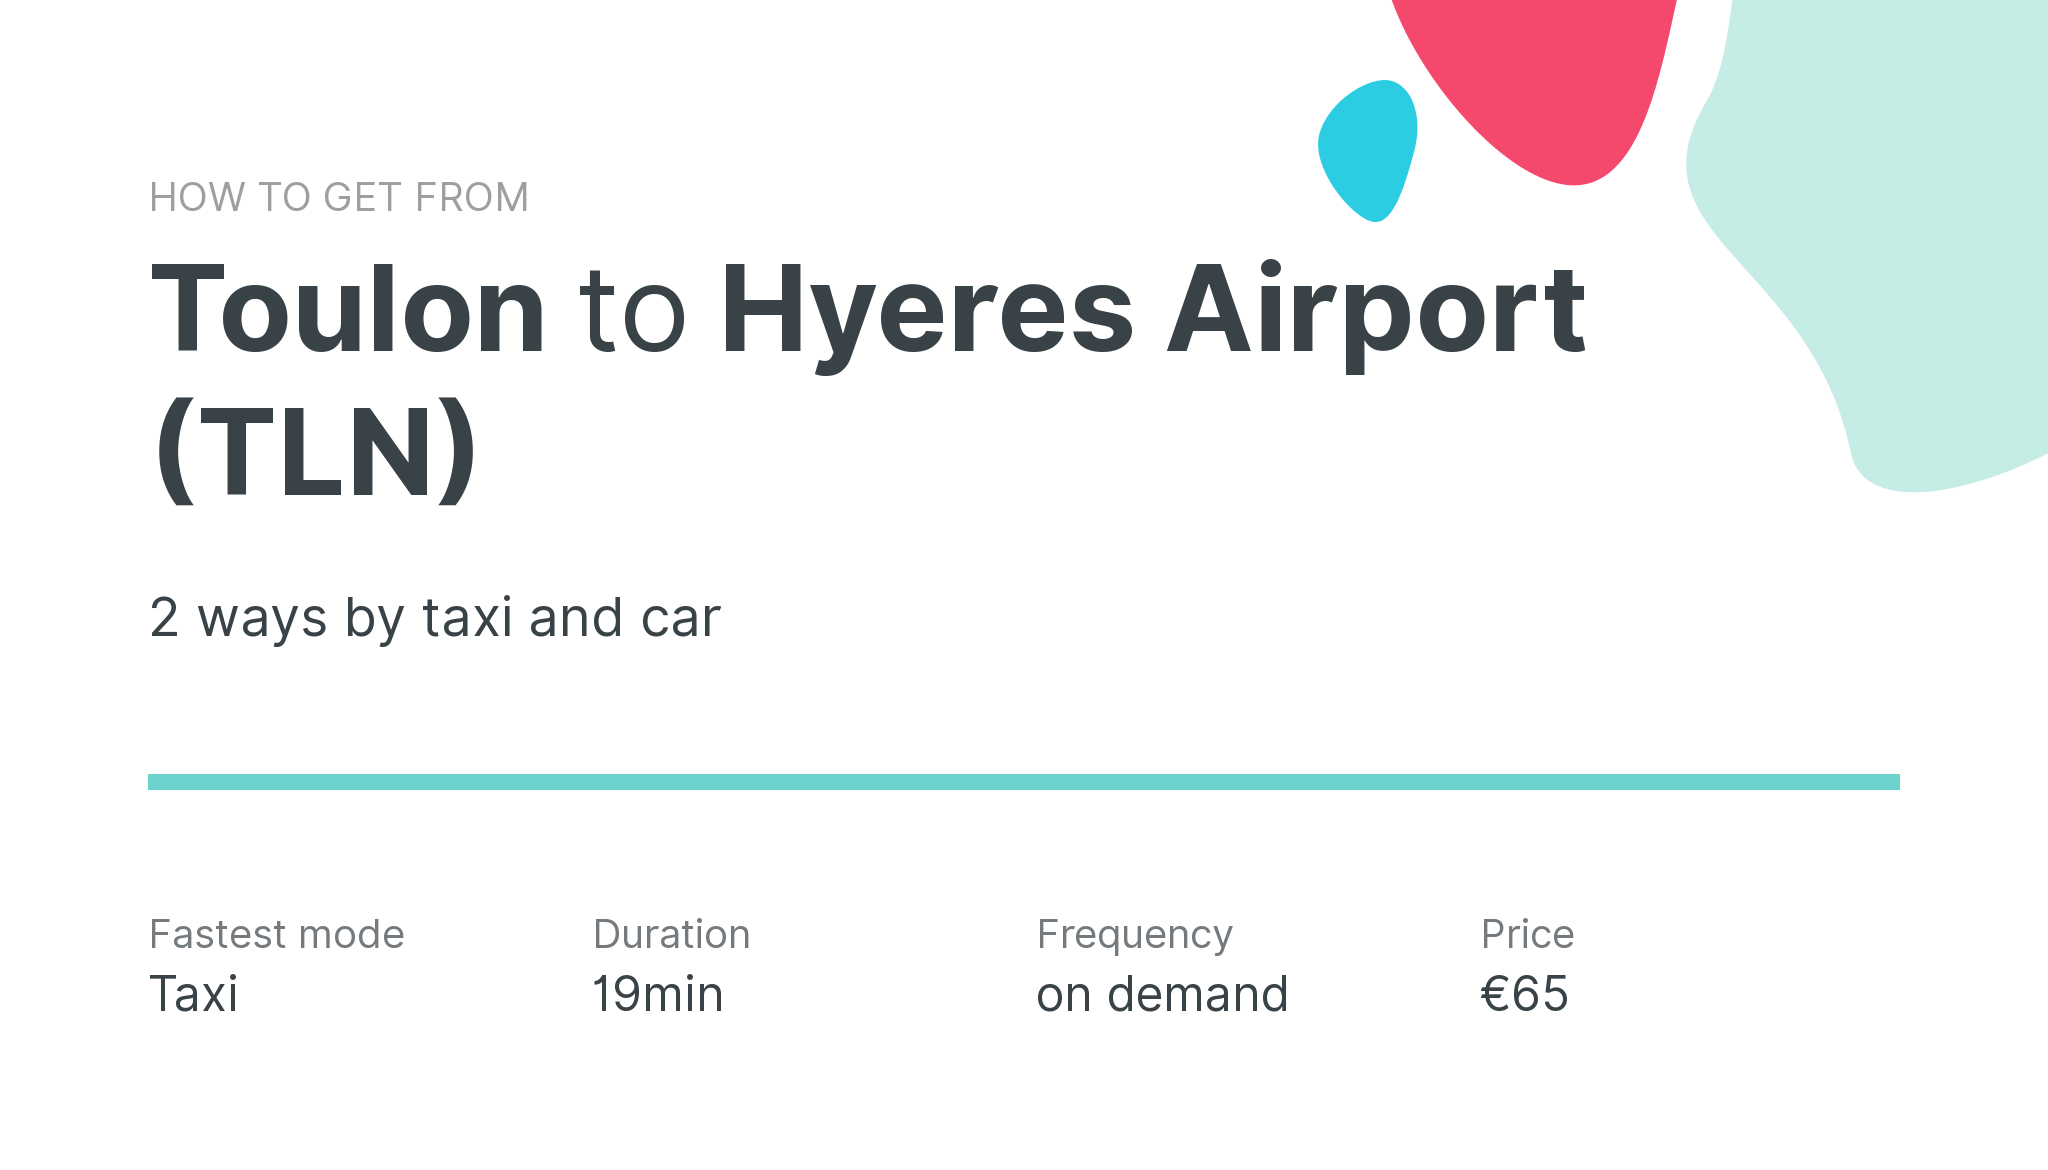 How do I get from Toulon to Hyeres Airport (TLN)